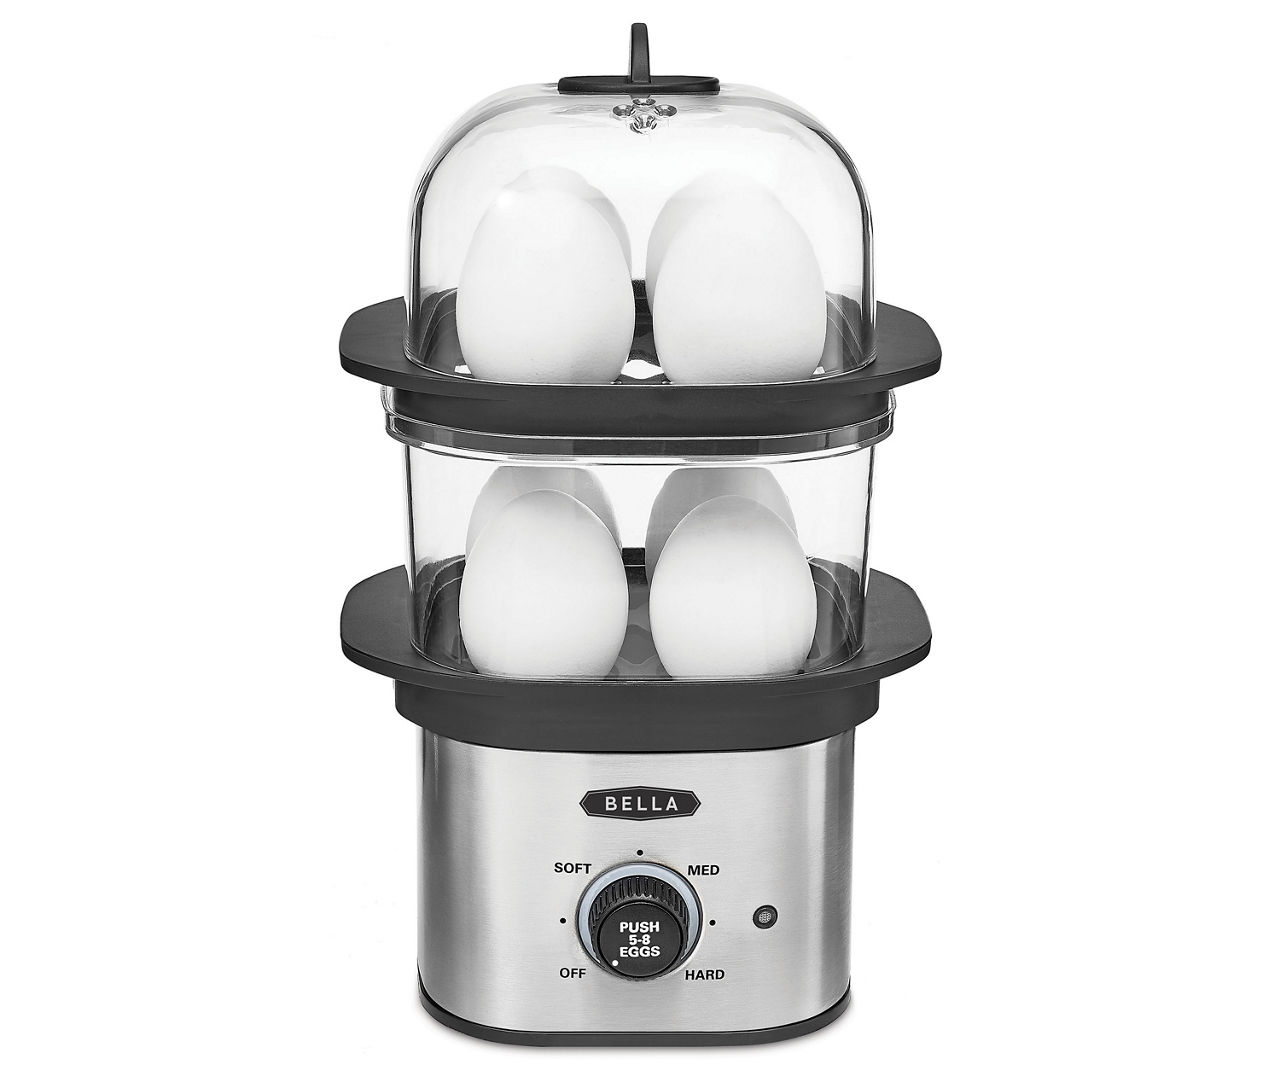 Bella egg cooker double decker for poached and hard boiled and